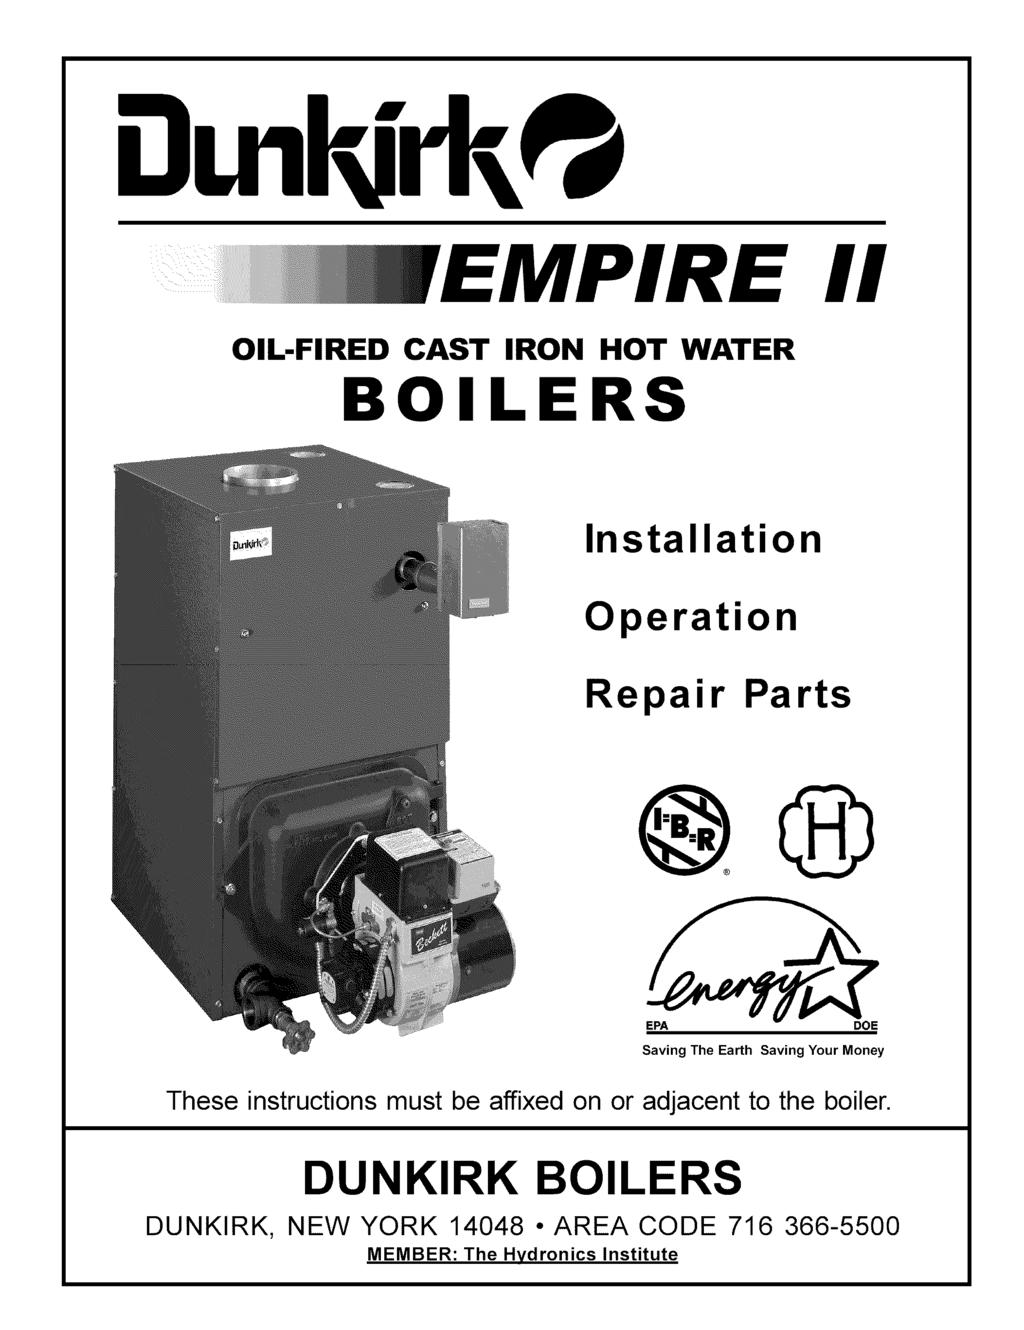 II OIL-FIRED CAST IRON HOT WATER BOILERS Installation Operation Repair Parts EPA Saving The Earth DOE Saving Your Money These instructions